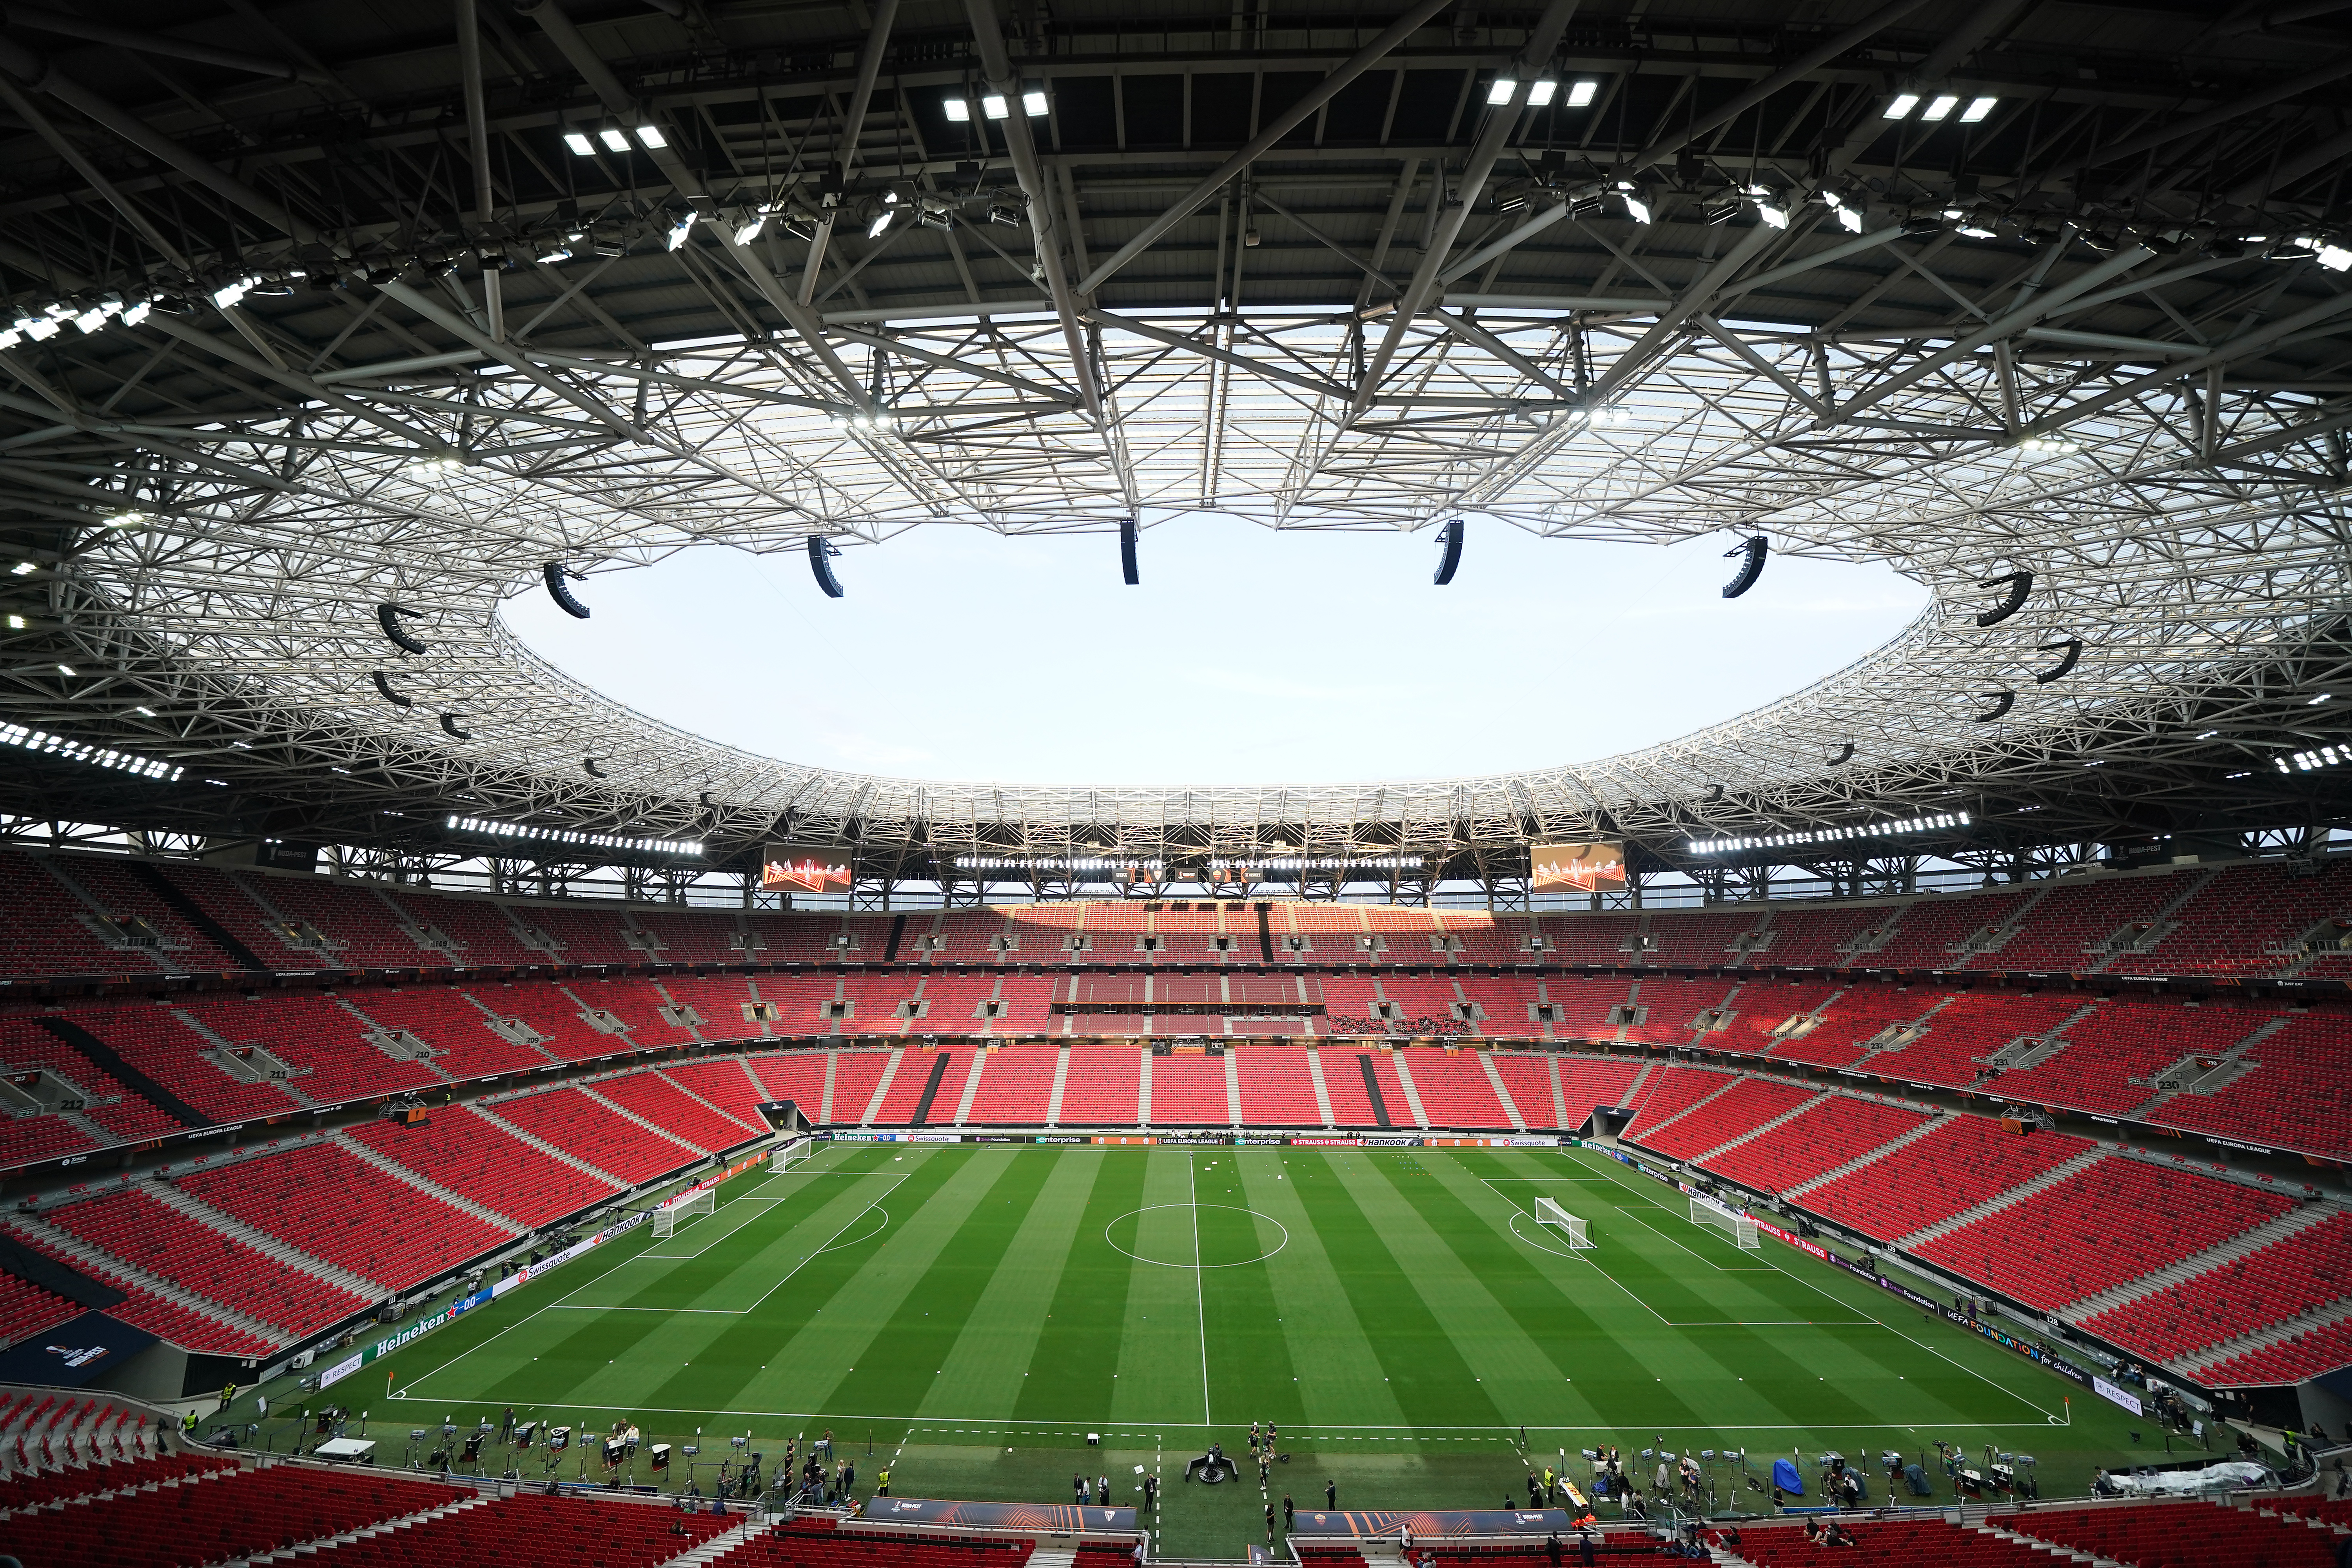 The Puskas Arena in Budapest will host Wednesday's Europa League final